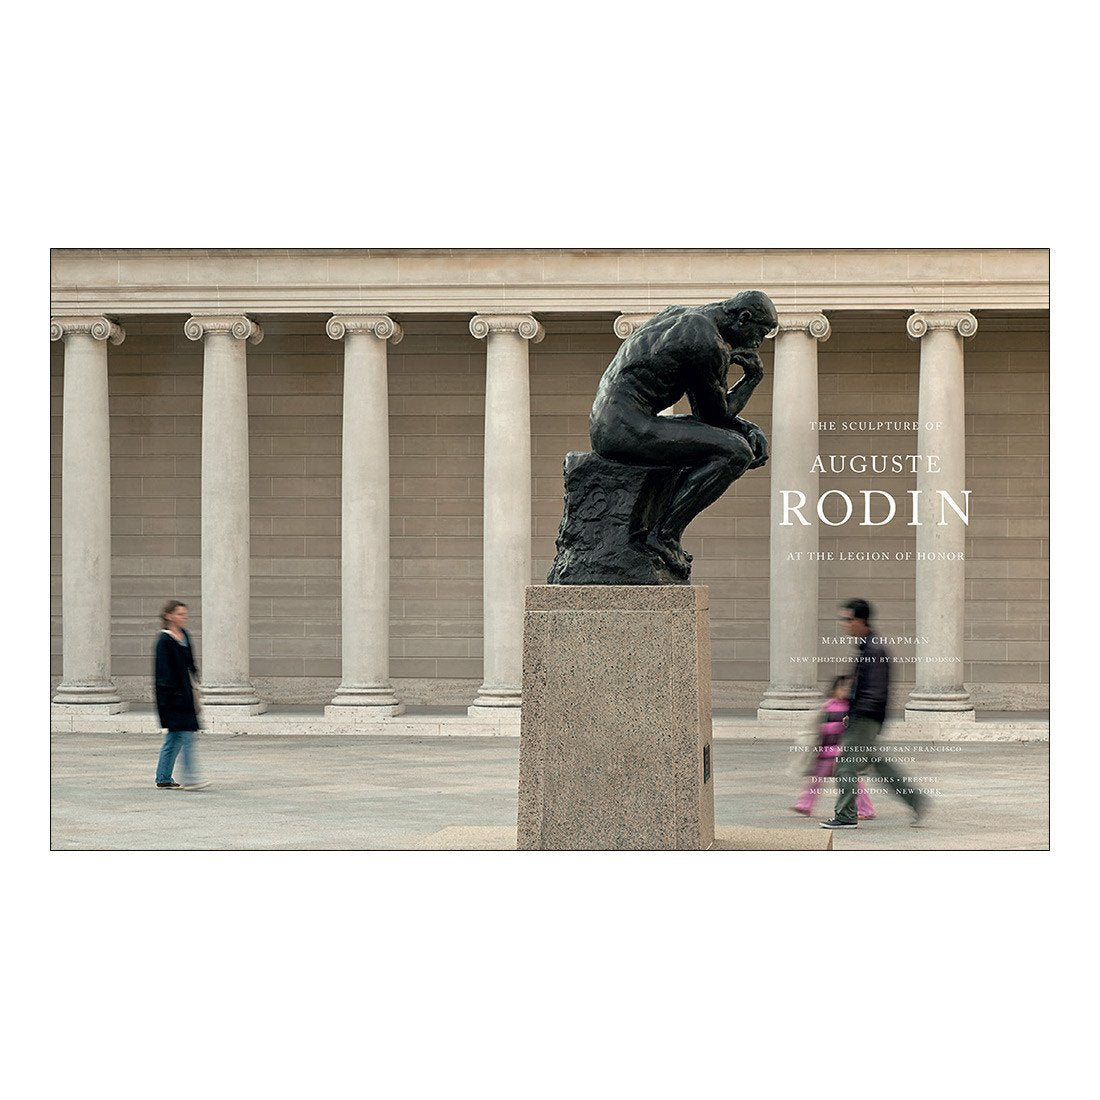 The Sculpture of Auguste Rodin at the Legion of Honor